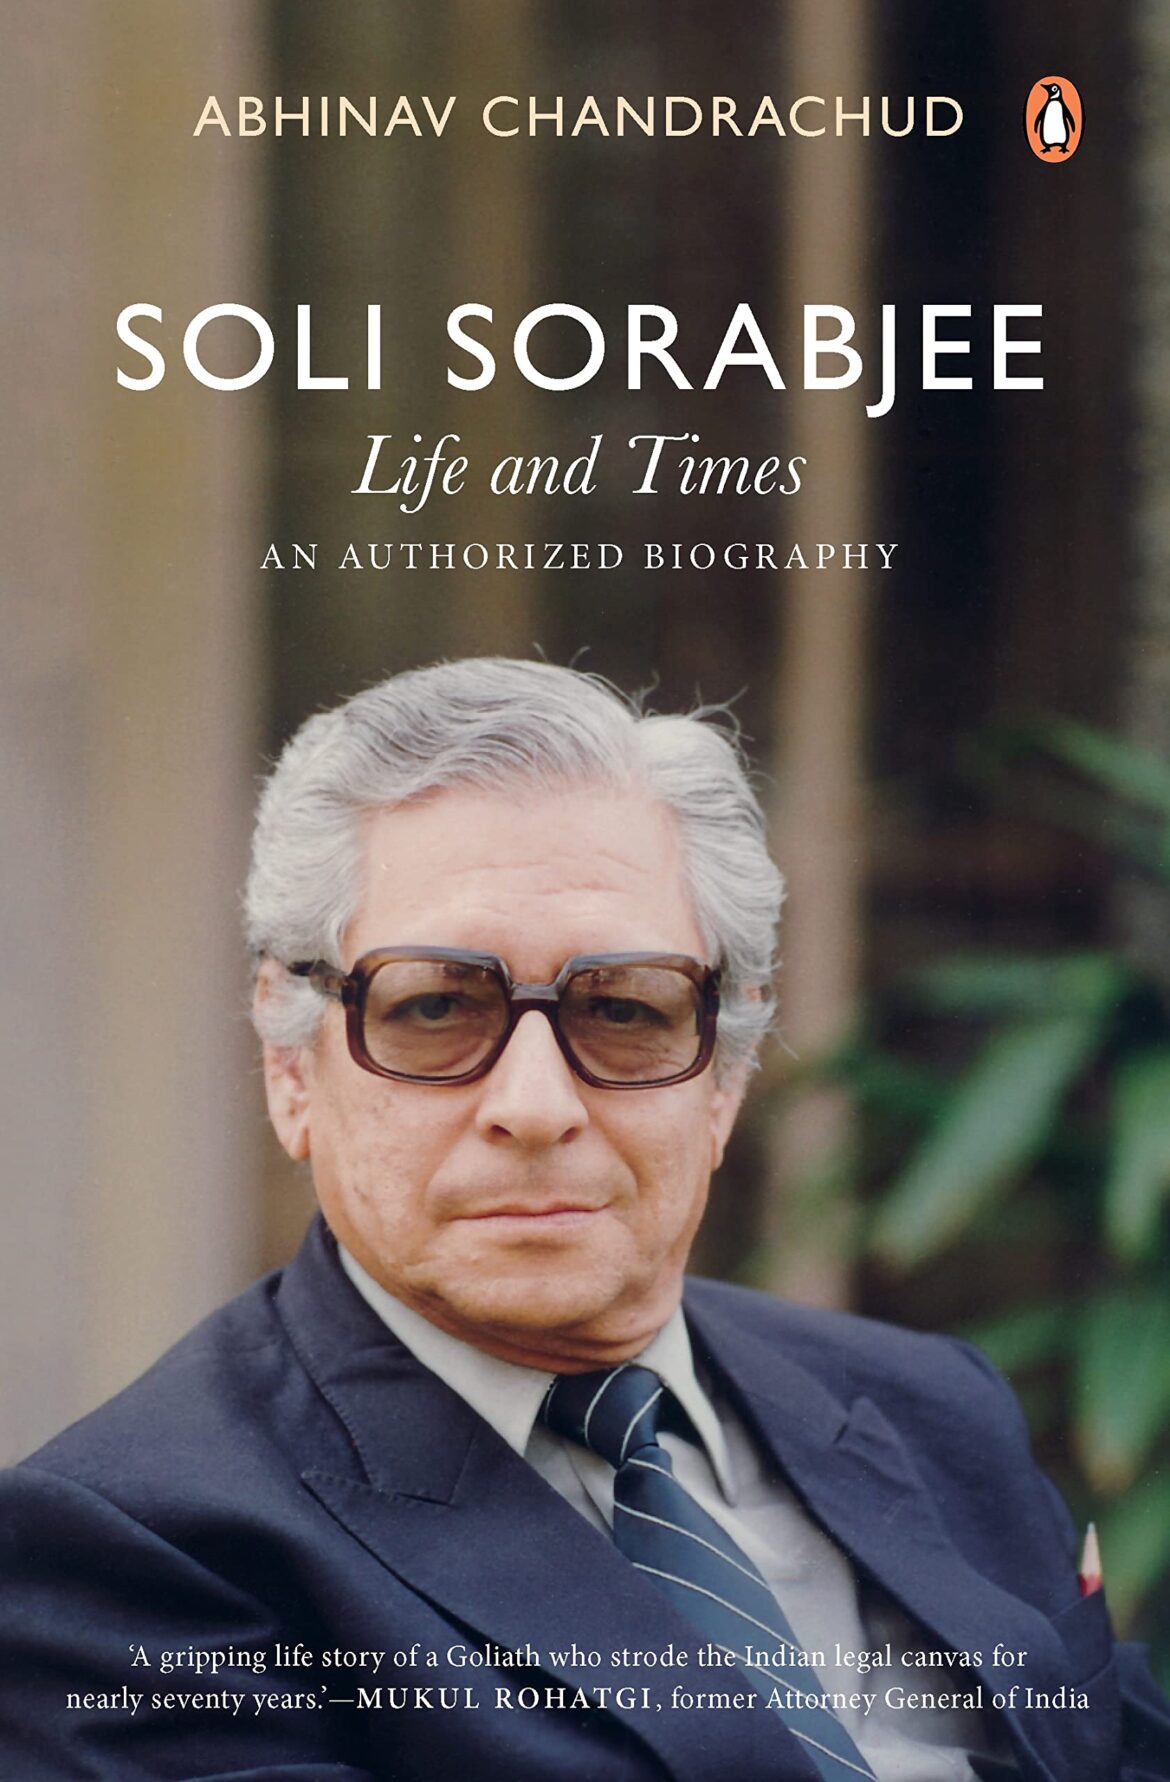 Penguin publishes the authorised biography of Soli Sorabjee- One of India’s foremost constitutional experts